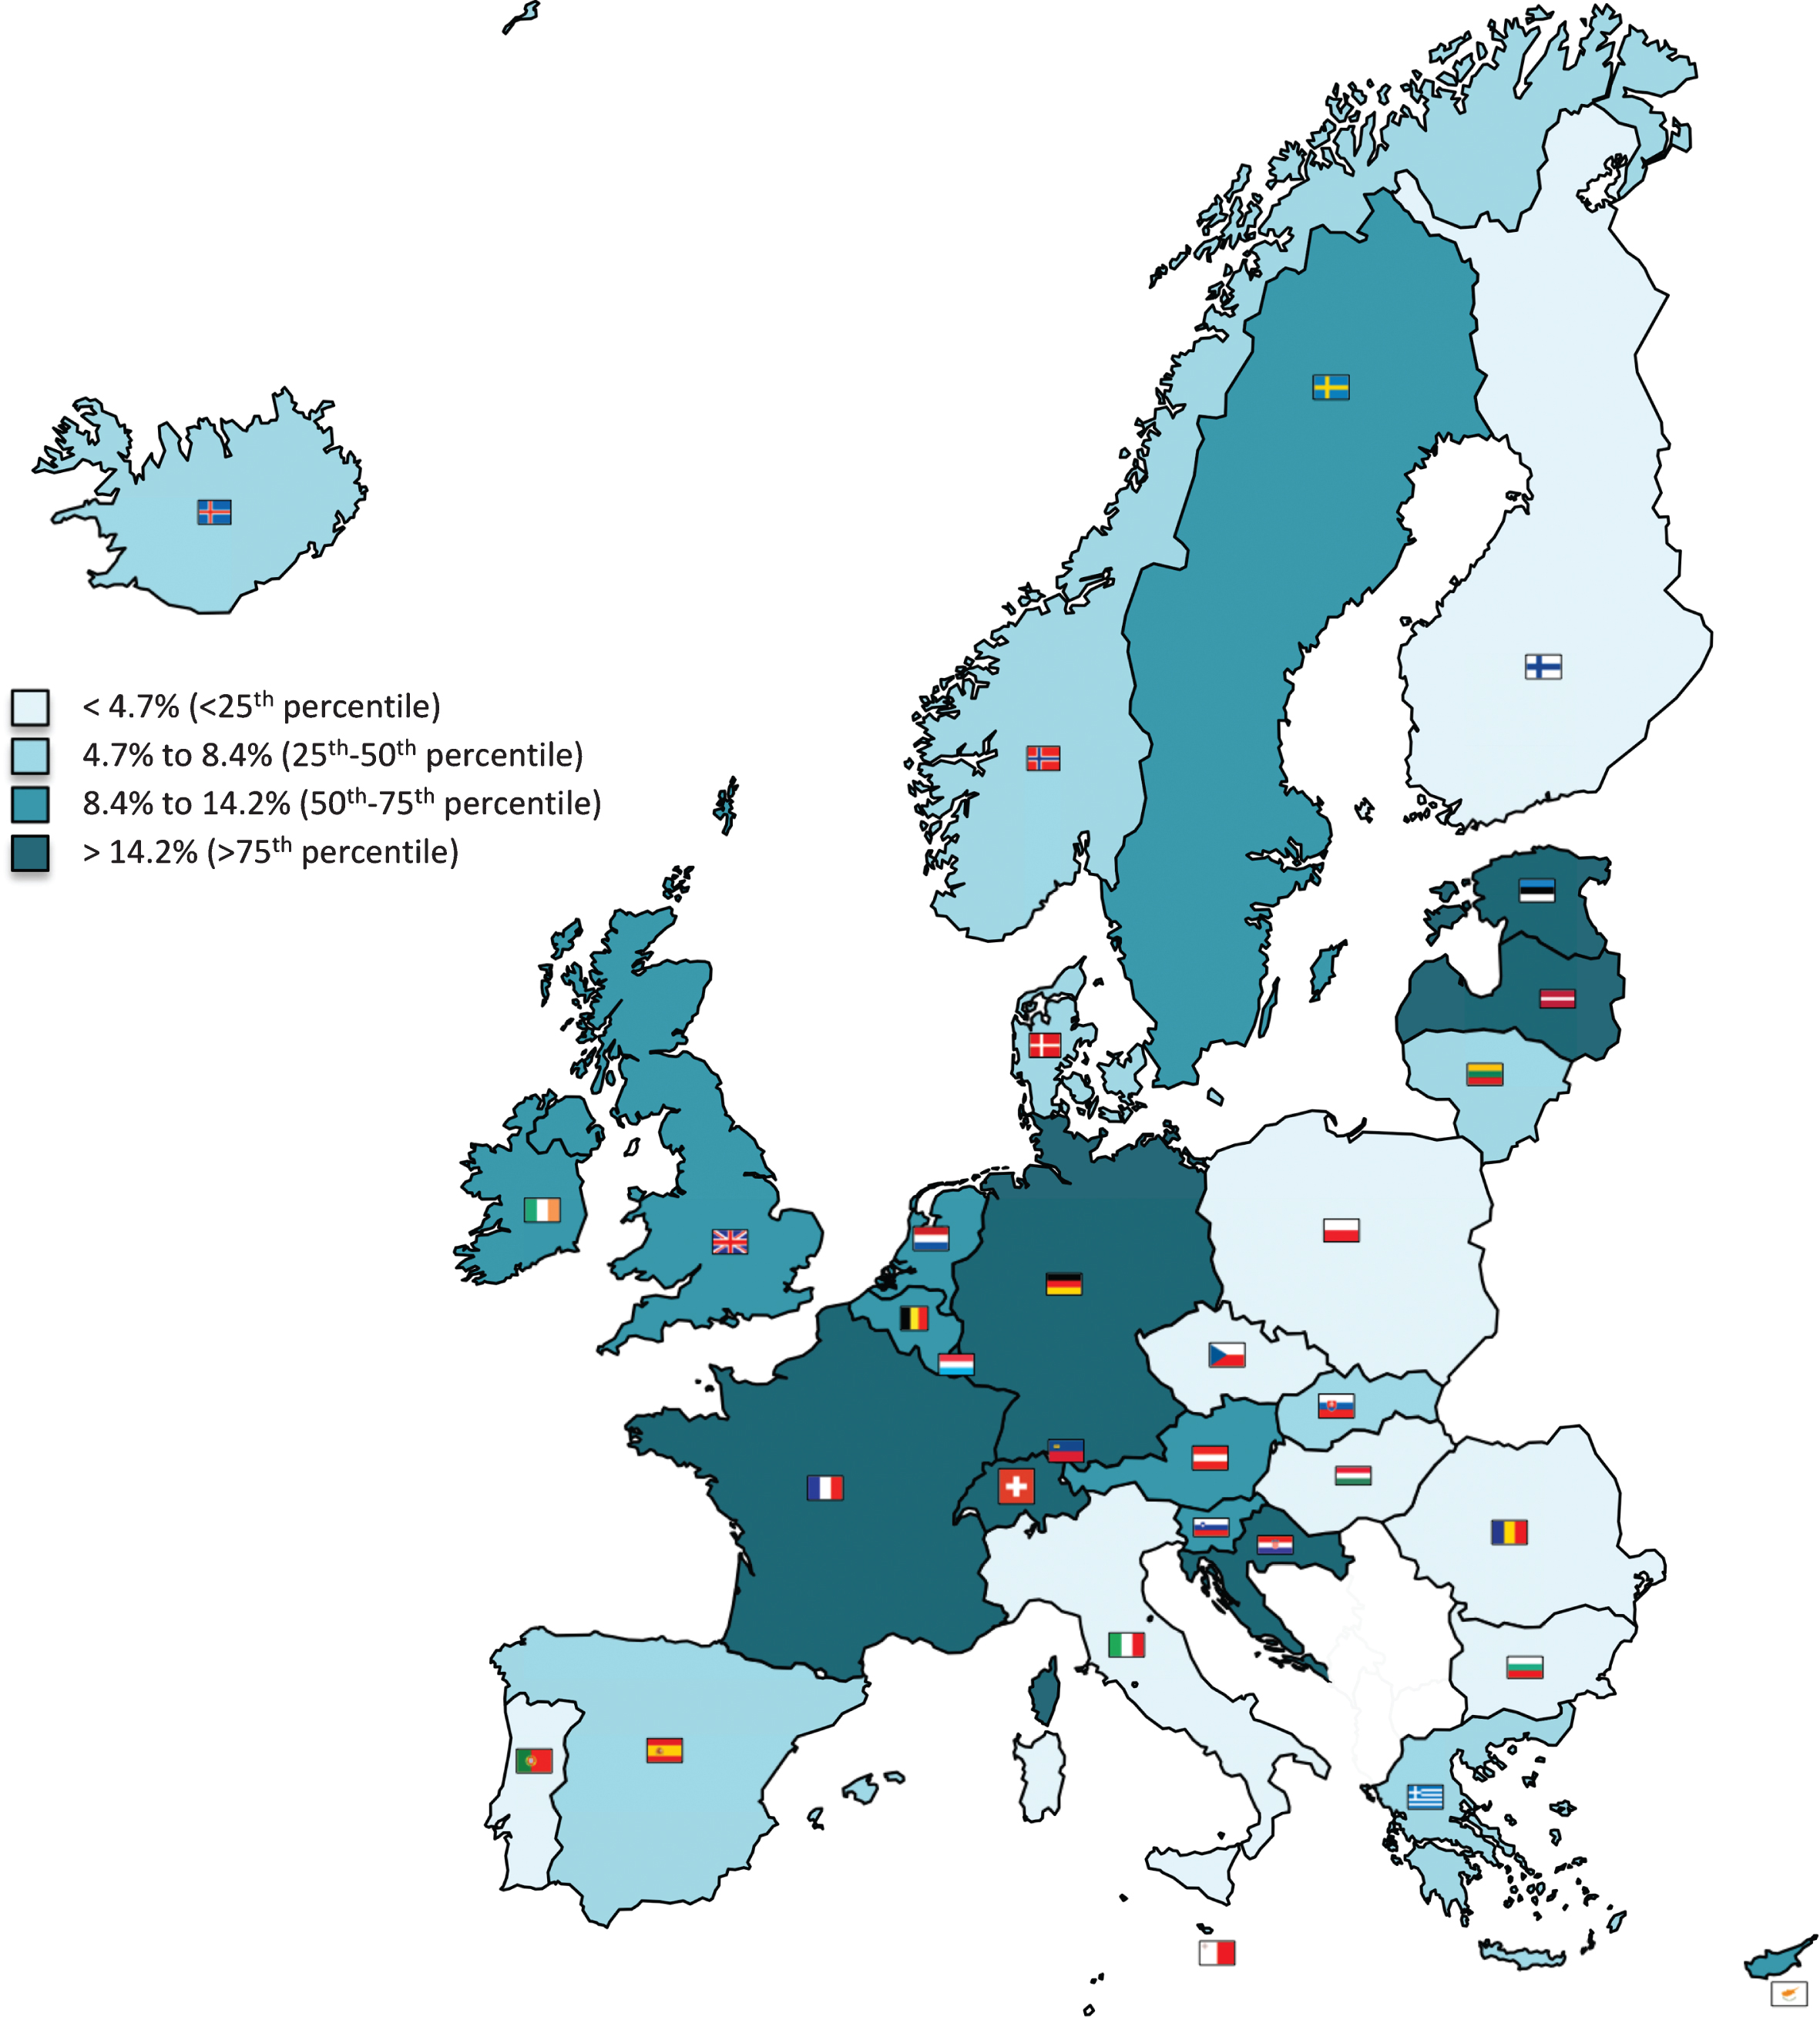 Proportion of mild cognitive impairment cases occurring in migrants in the 32 considered countries. Estimated cases of mild cognitive impairment in migrants and in the overall population were calculated by considering the International Working Group definition.